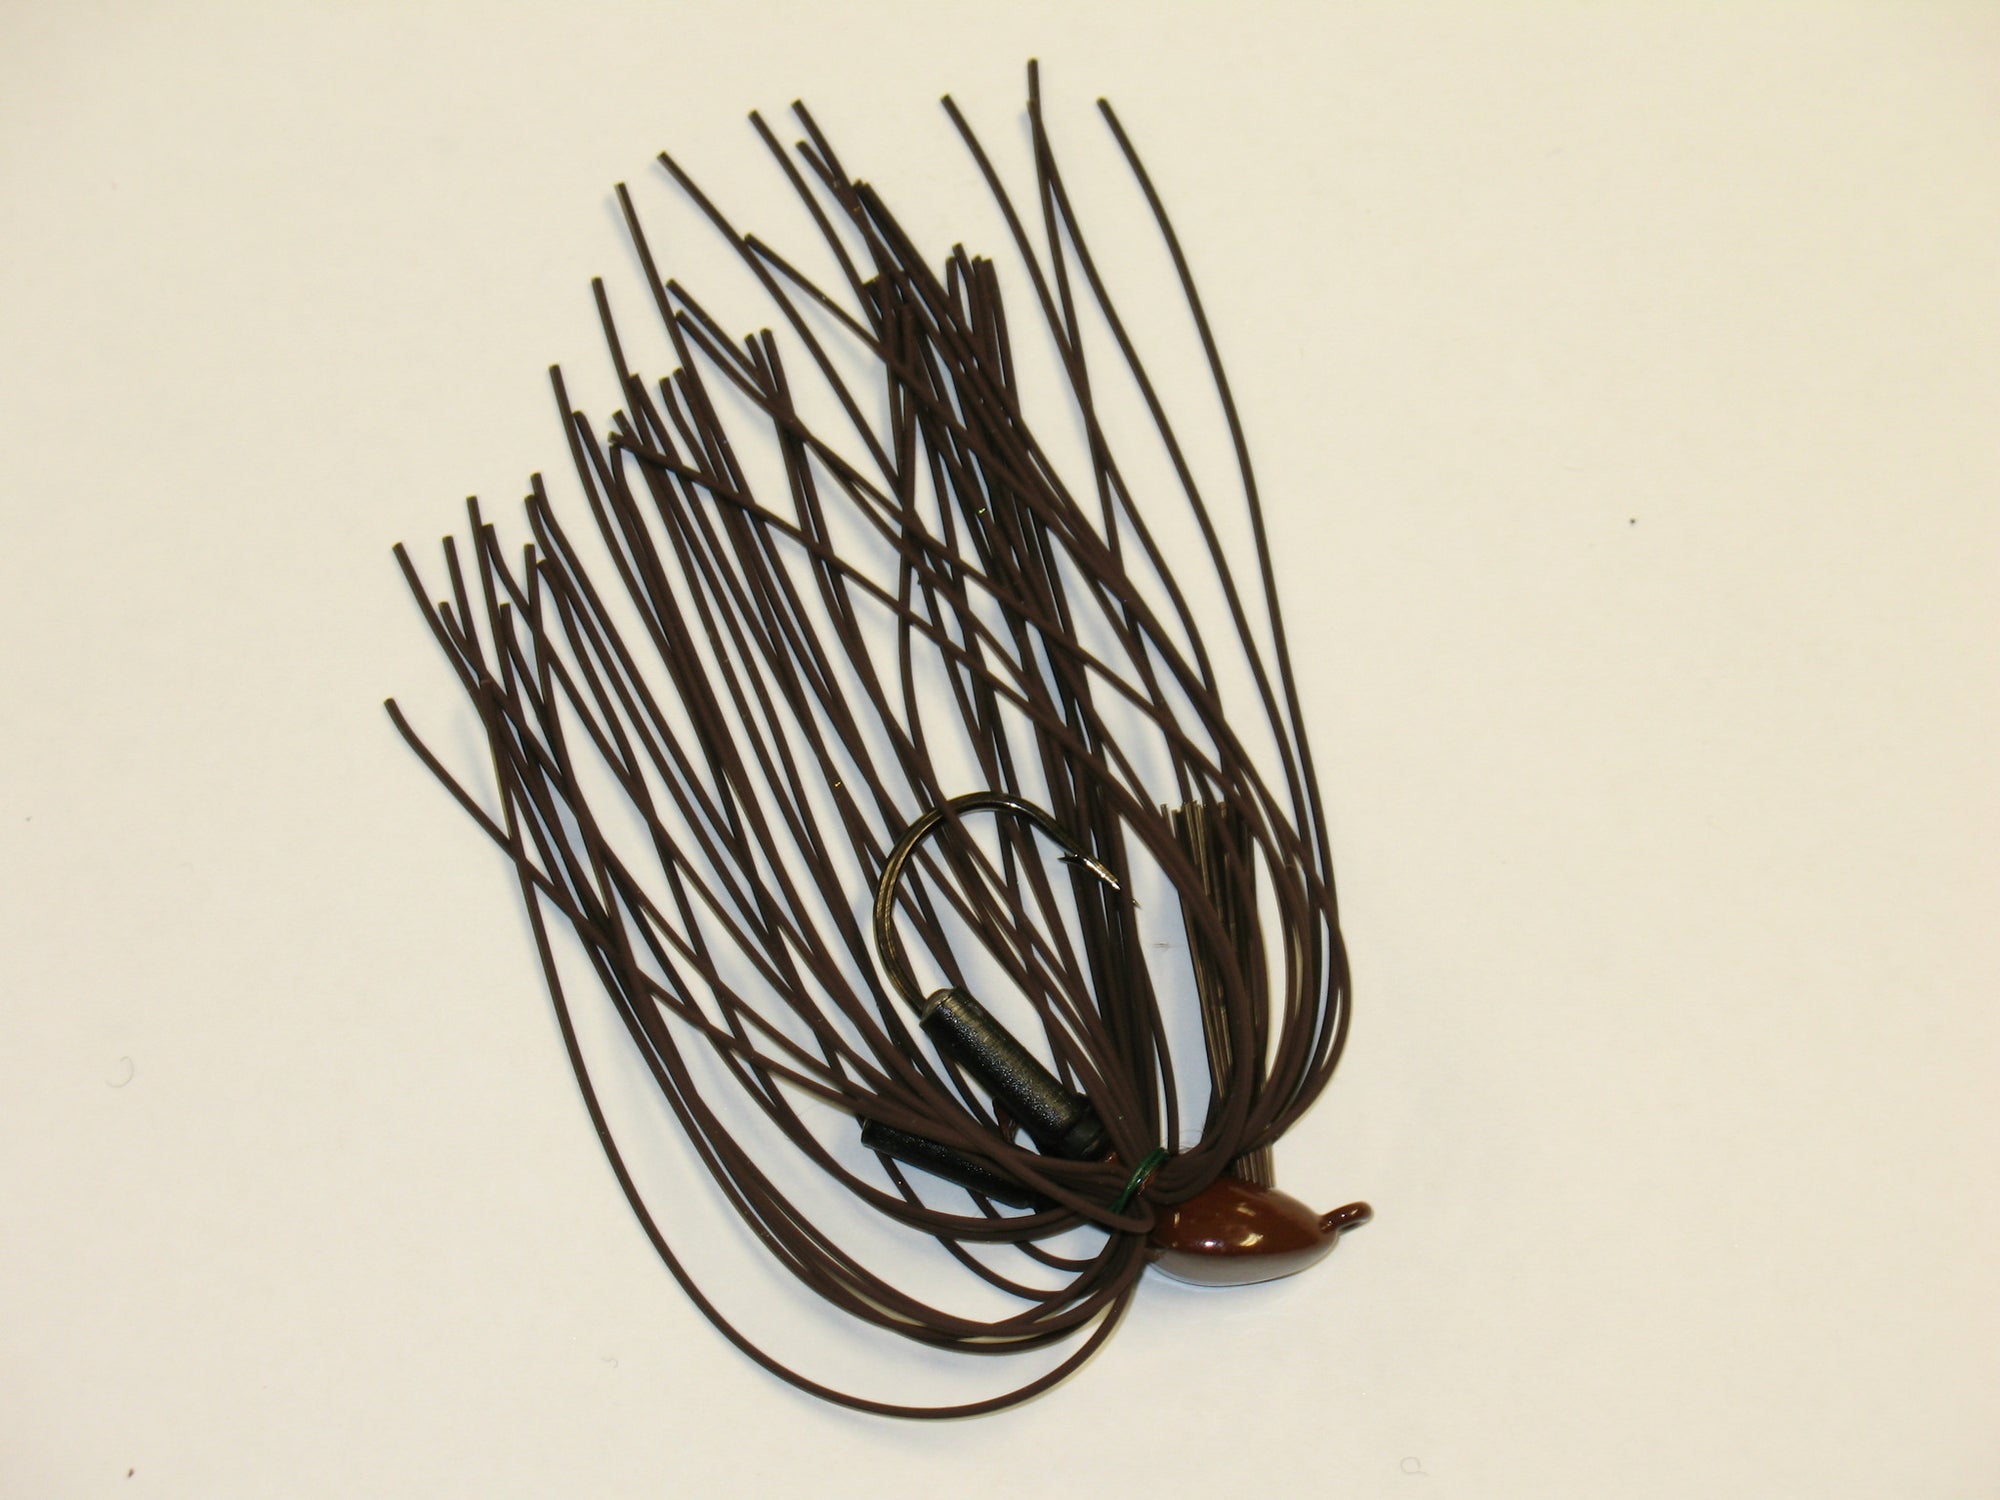 Sample Pack of Buckeye Lures Football Mop Jig (All 5 Colors) - Angler's  Headquarters